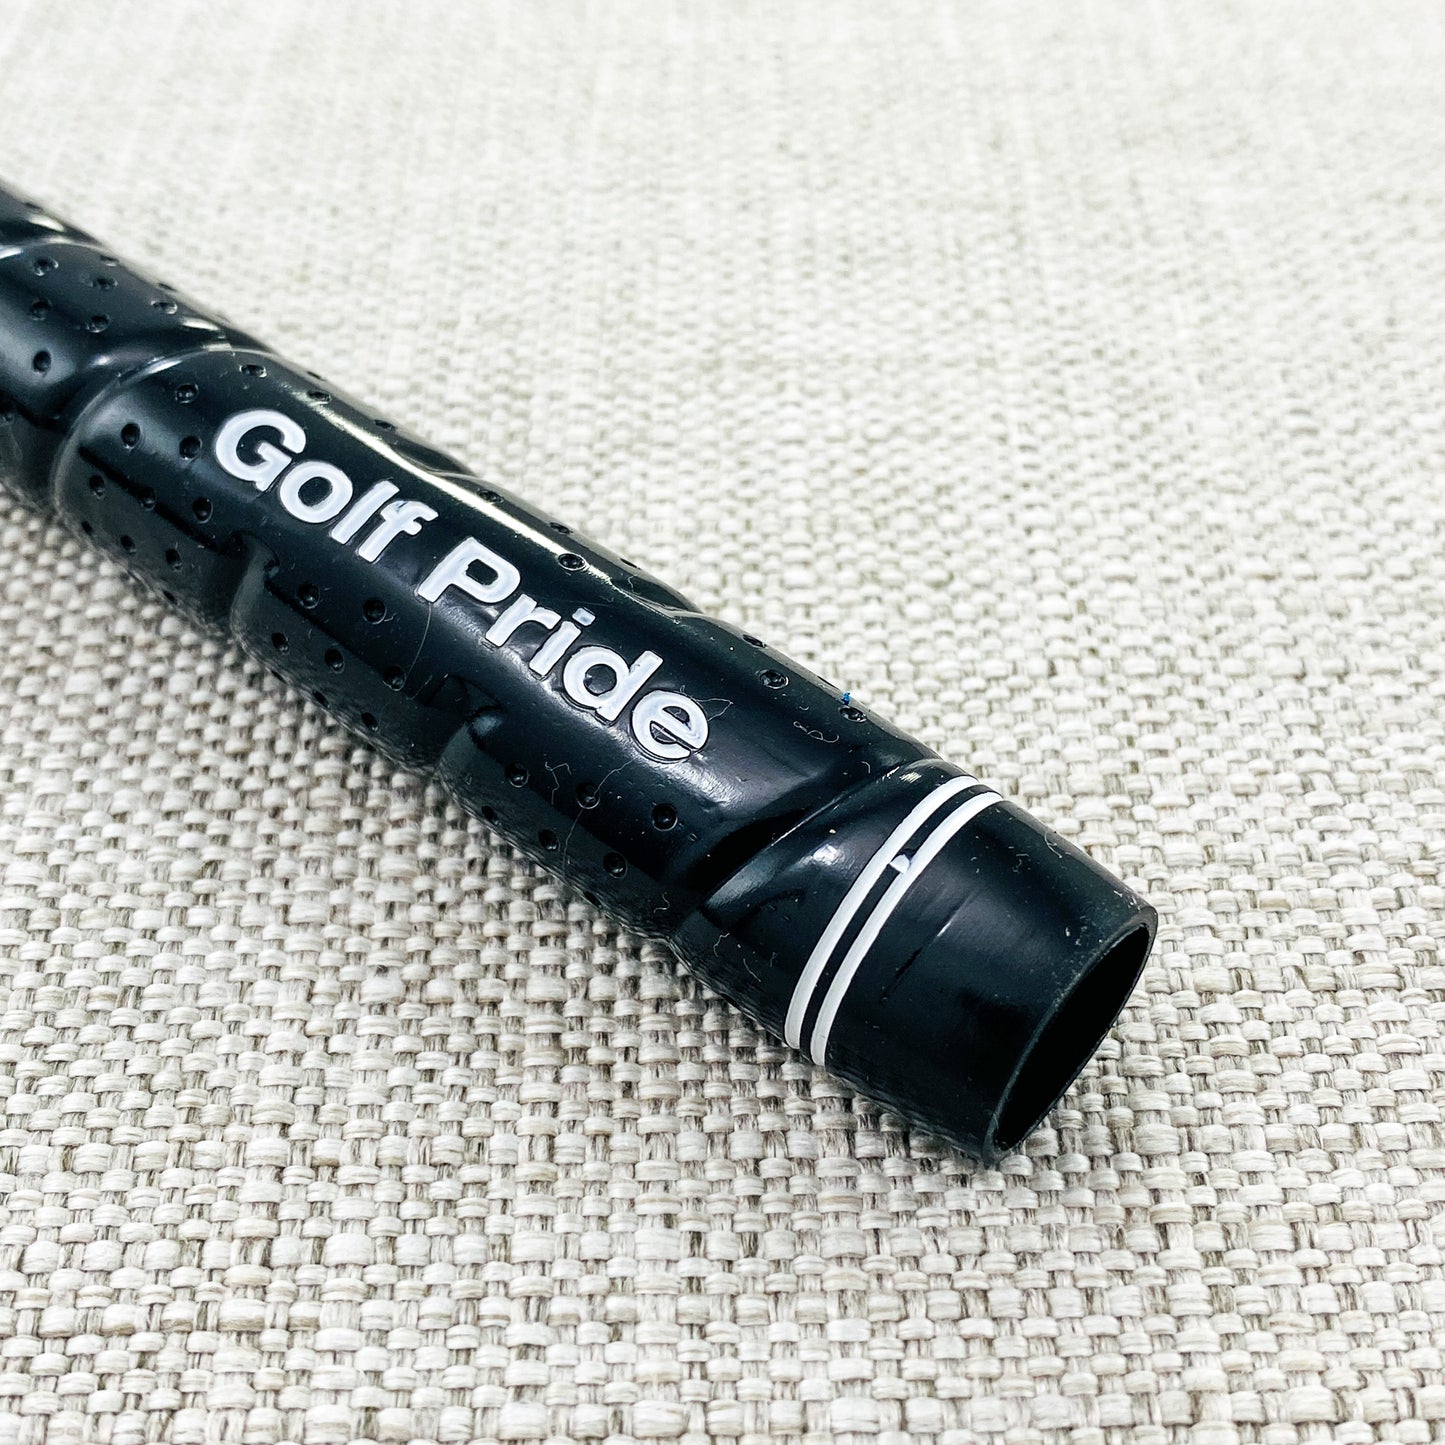 Golf Pride Tour Wrap 2G swing grip. Choice of size. Black - Price includes fitment.